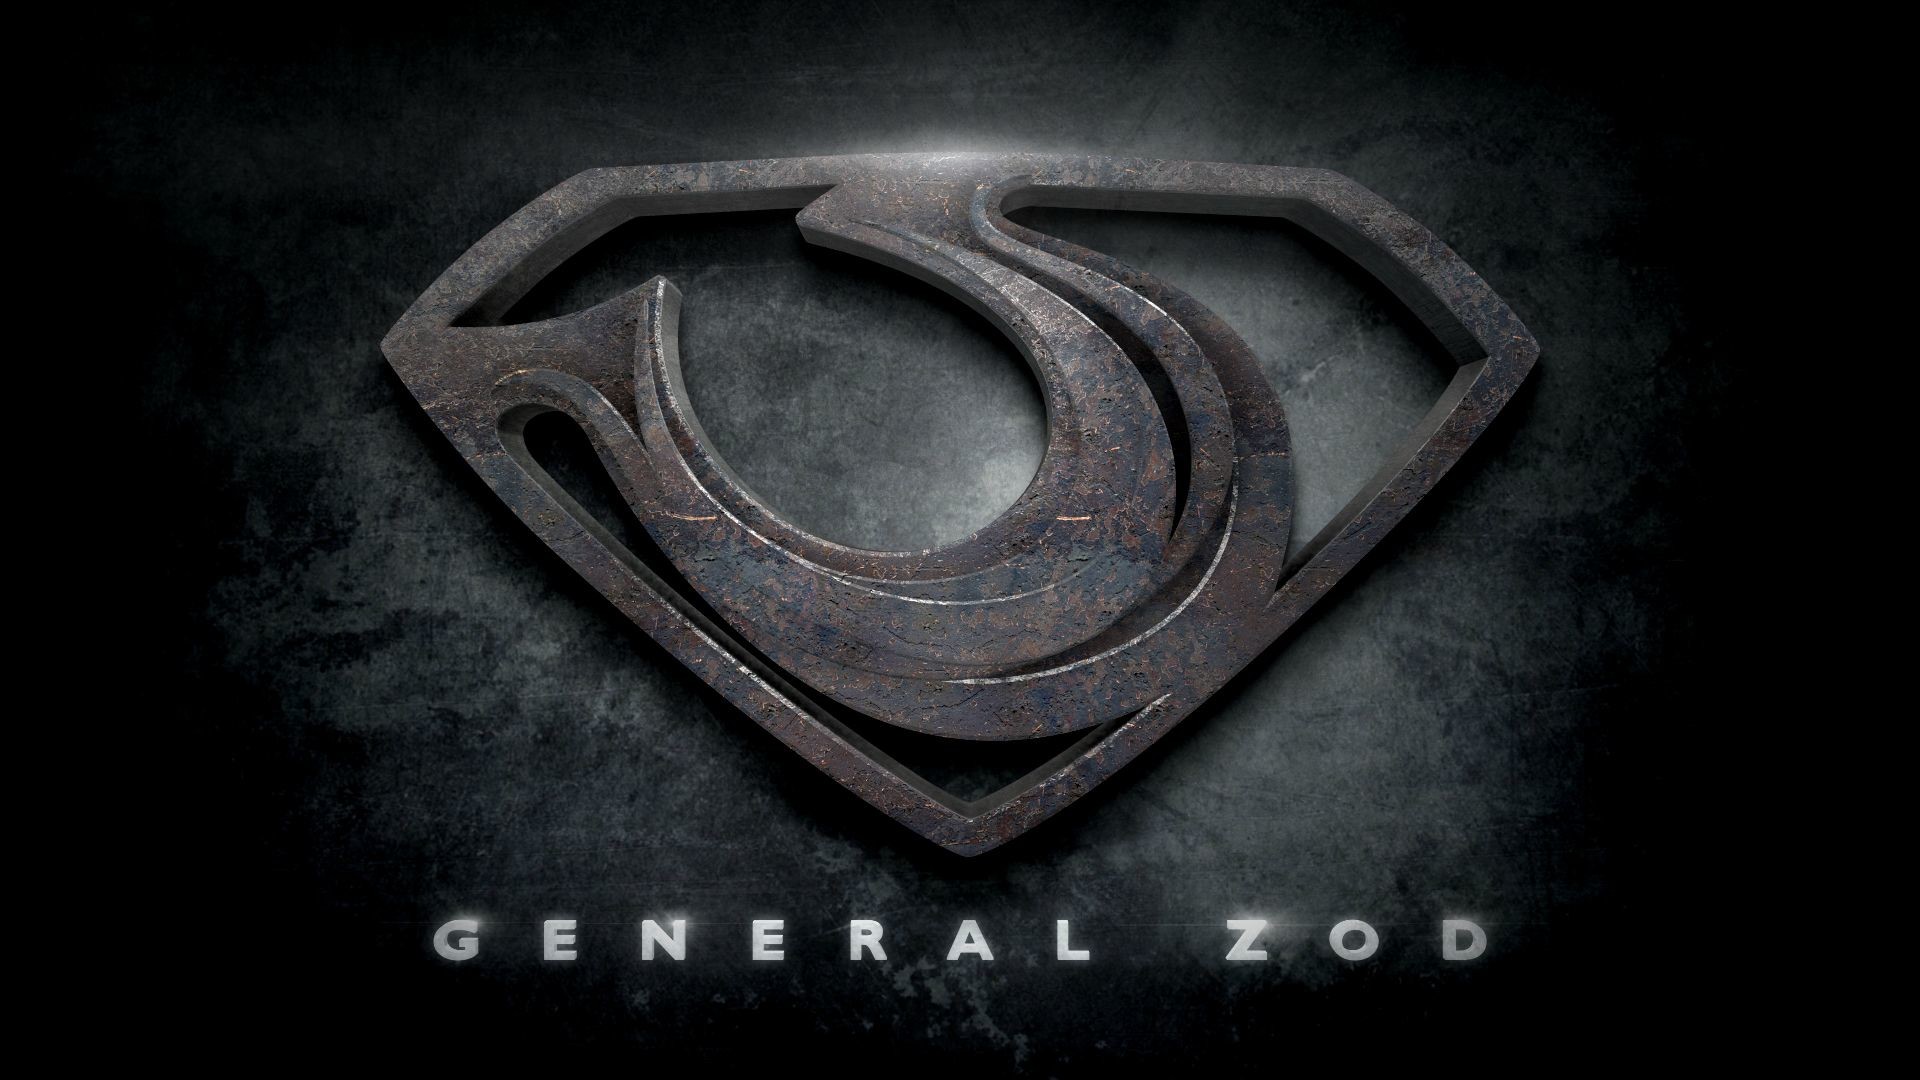 1920x1080 Justice League Logos in the Style of "Man of Steel"